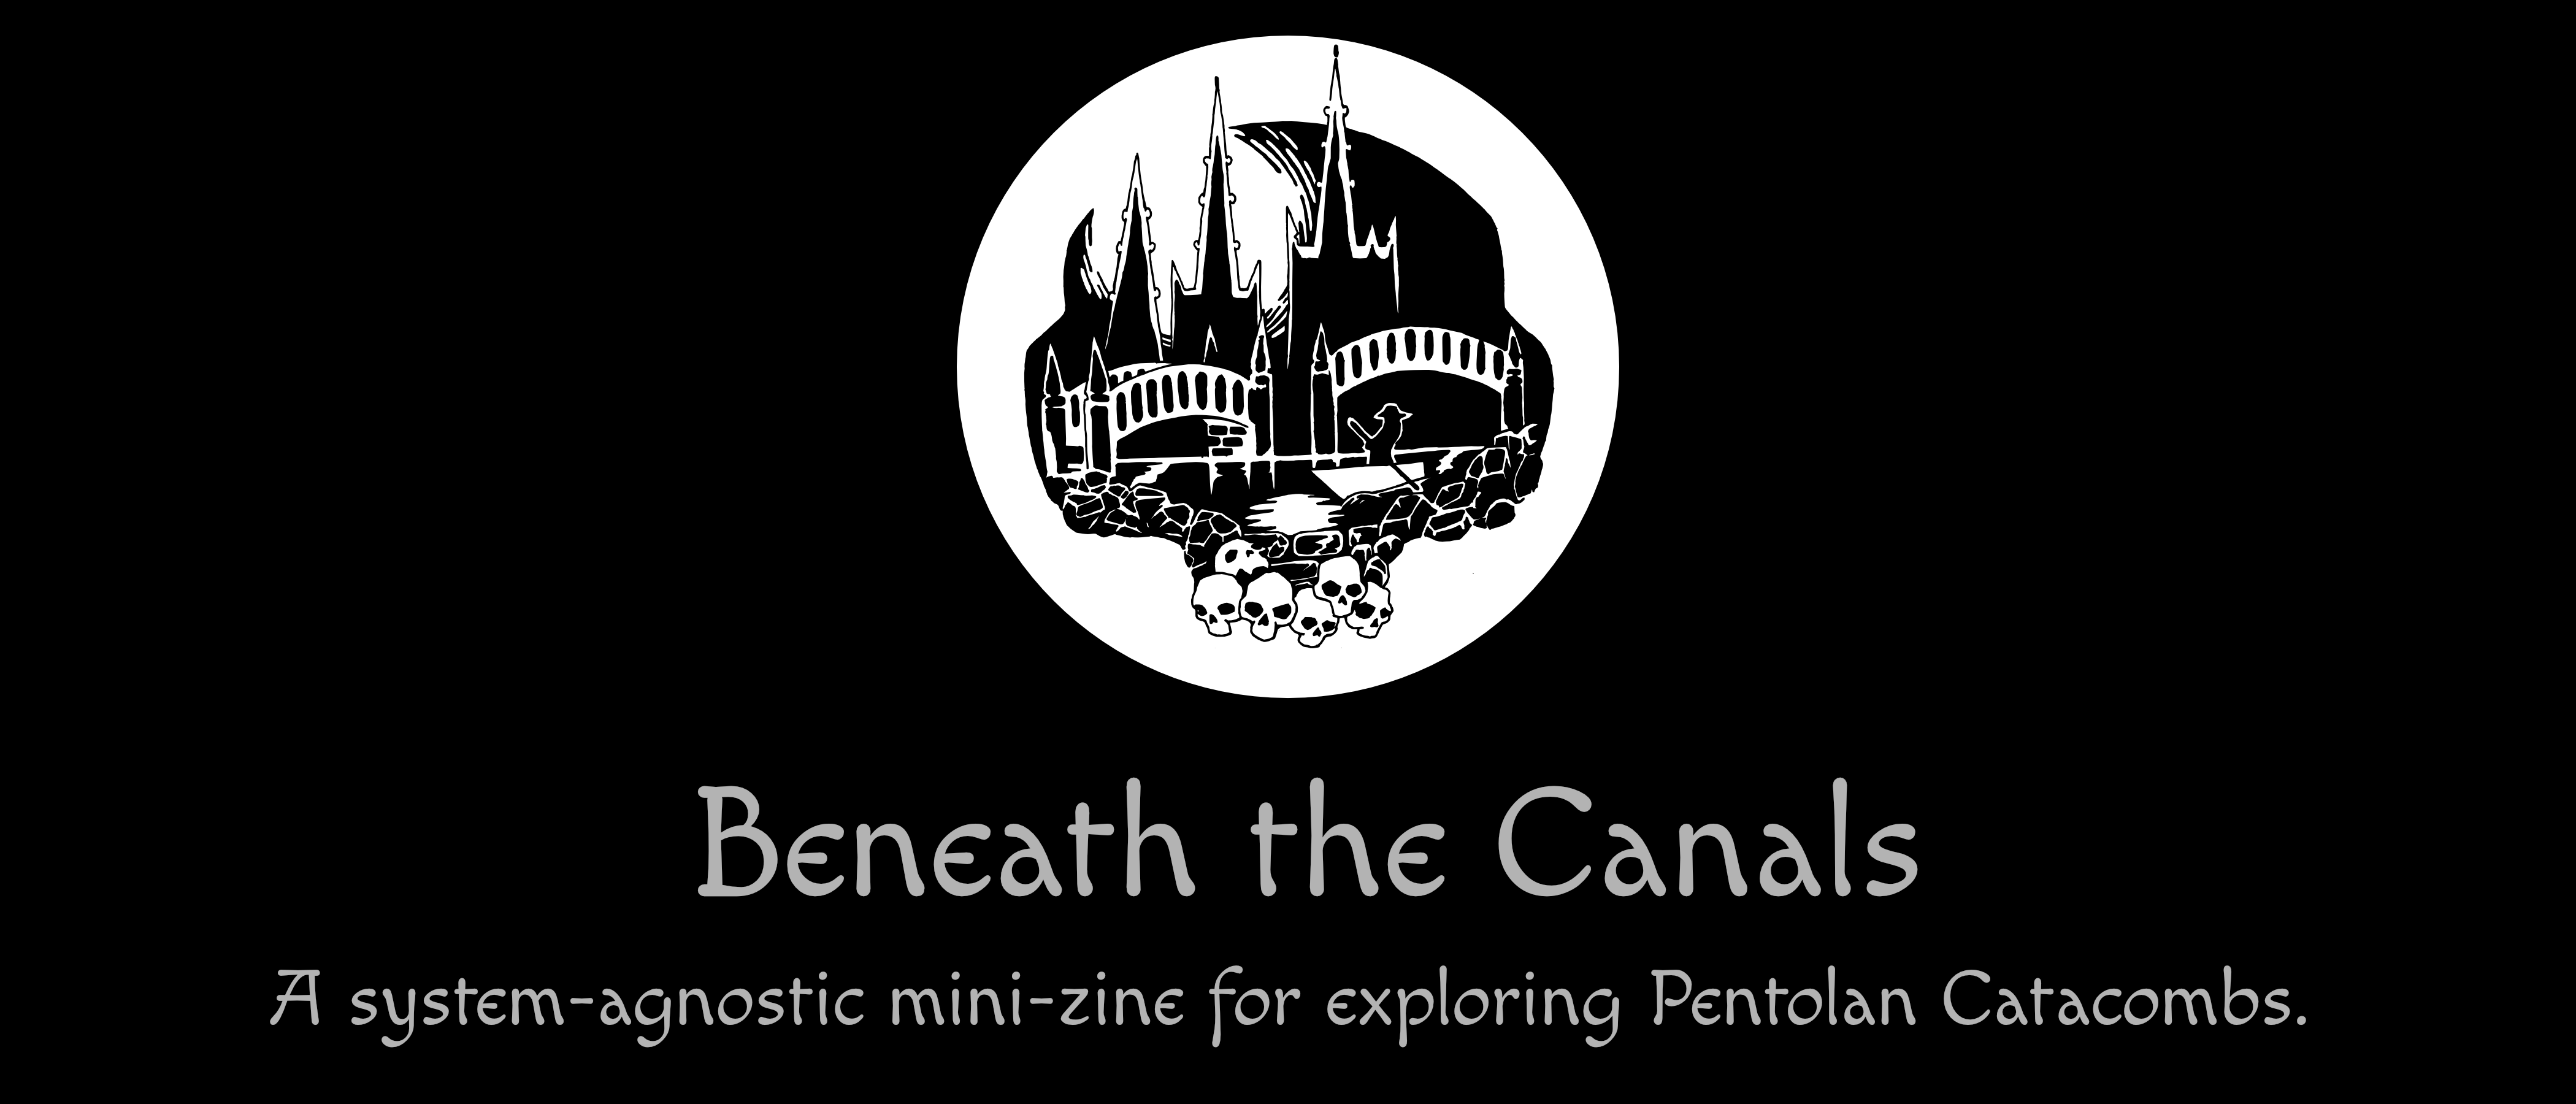 Beneath the Canals